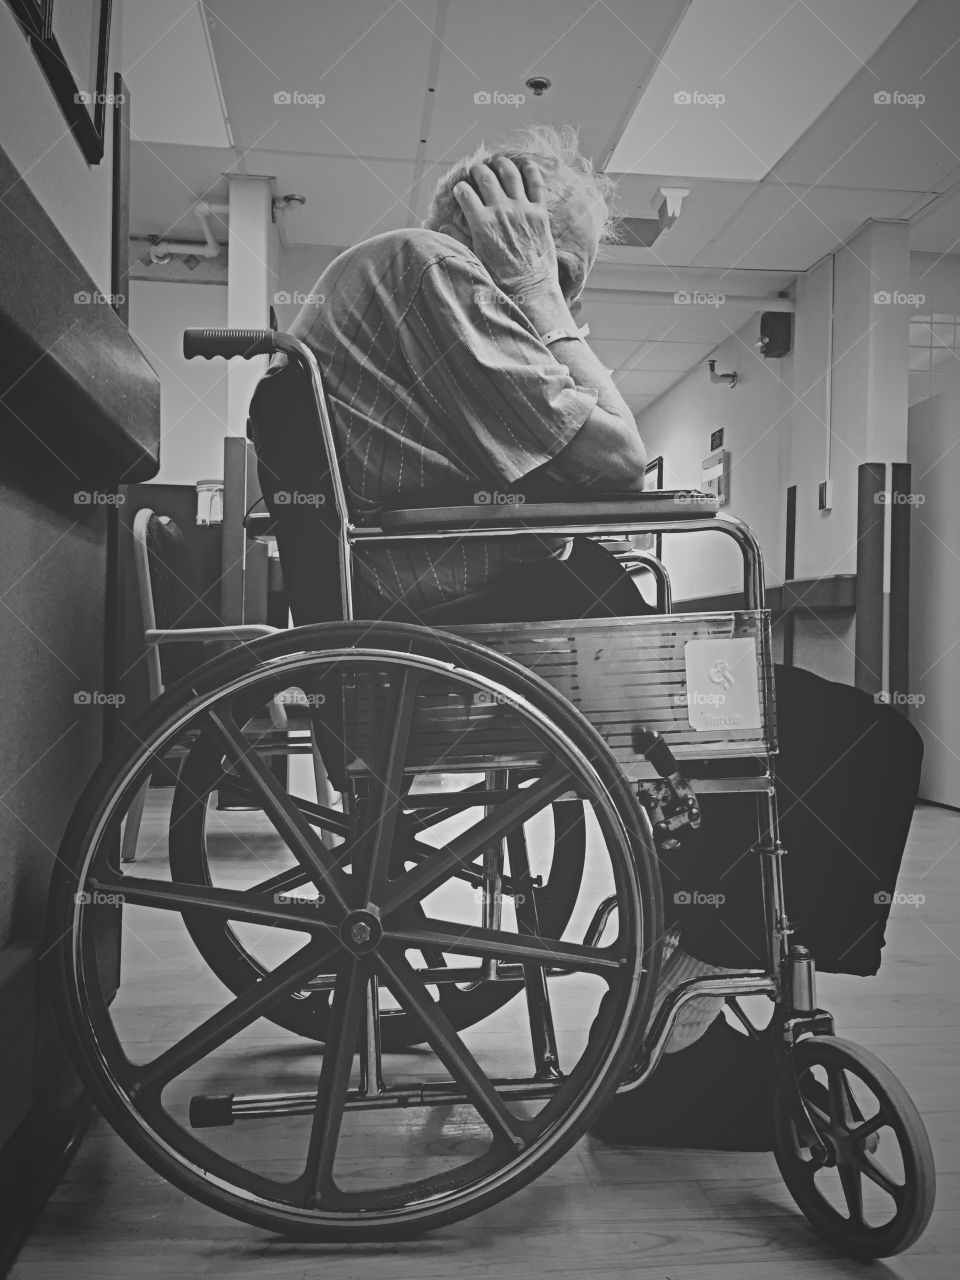 Despair . One of the many emotions the elderly experience daily living in nursing facilities. 